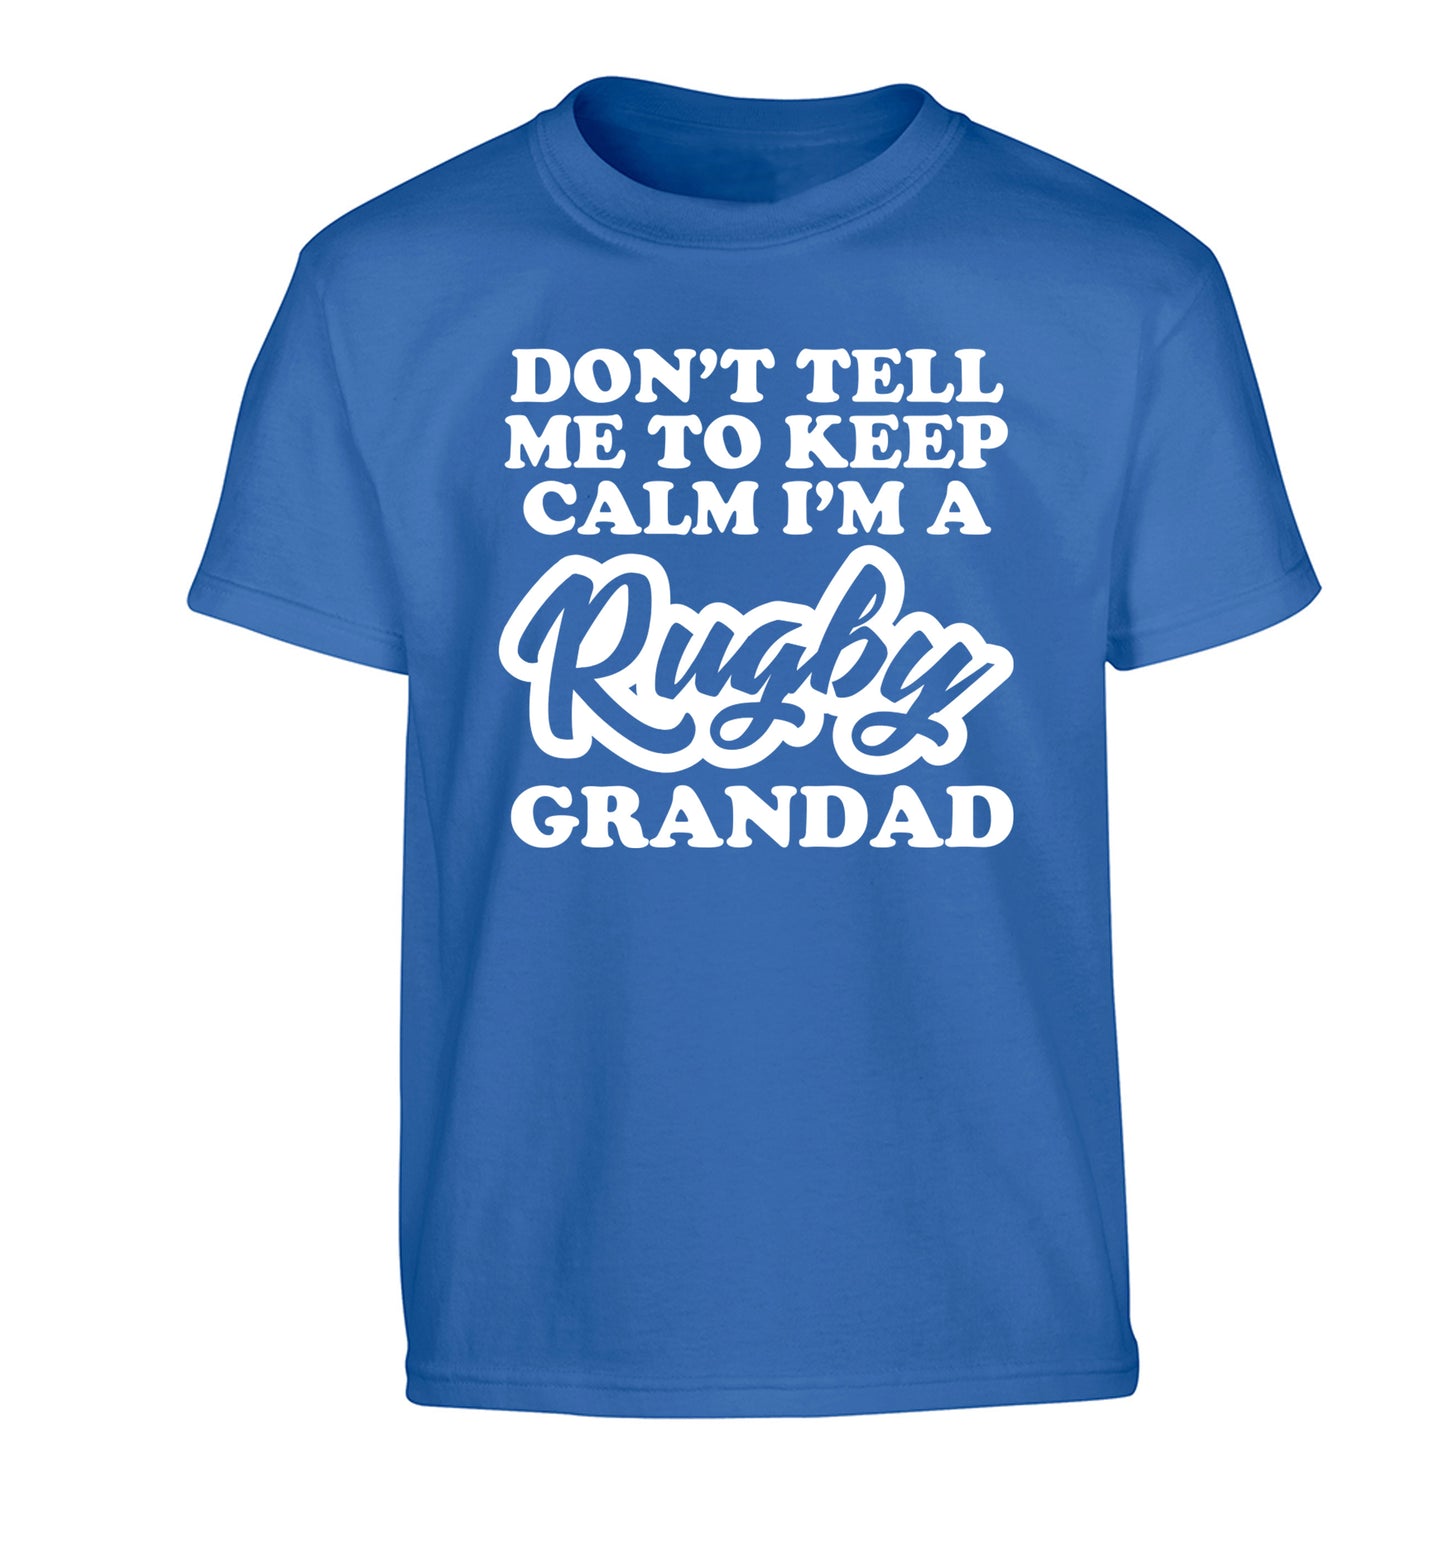 Don't tell me to keep calm I'm a rugby dad Children's blue Tshirt 12-13 Years